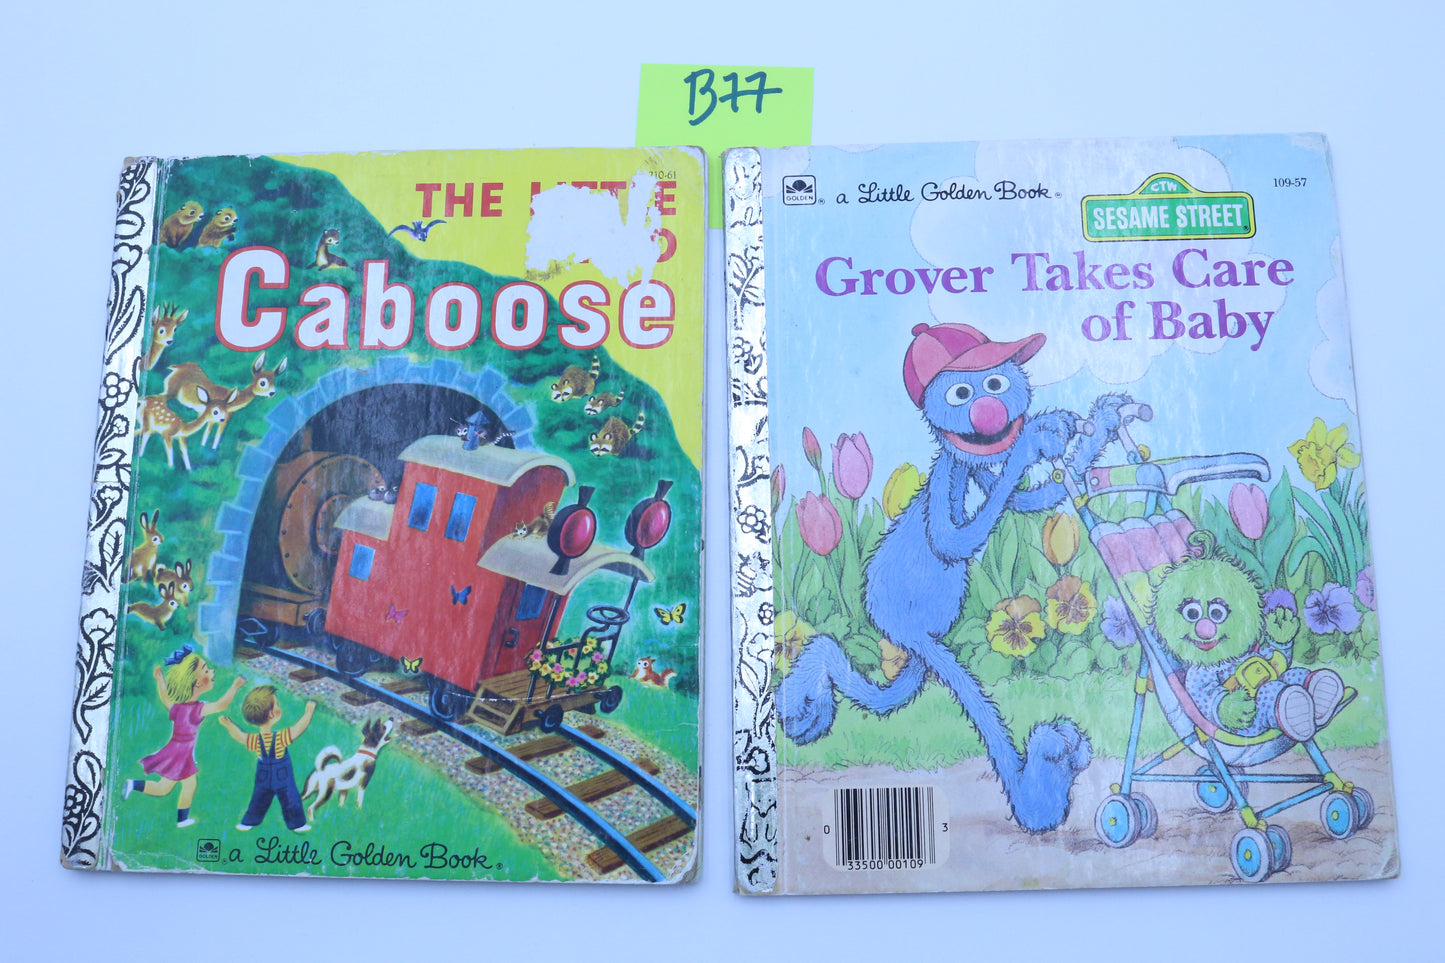 Little Golden Books The Little Caboose or Sesame Street Grover Takes Care of Baby